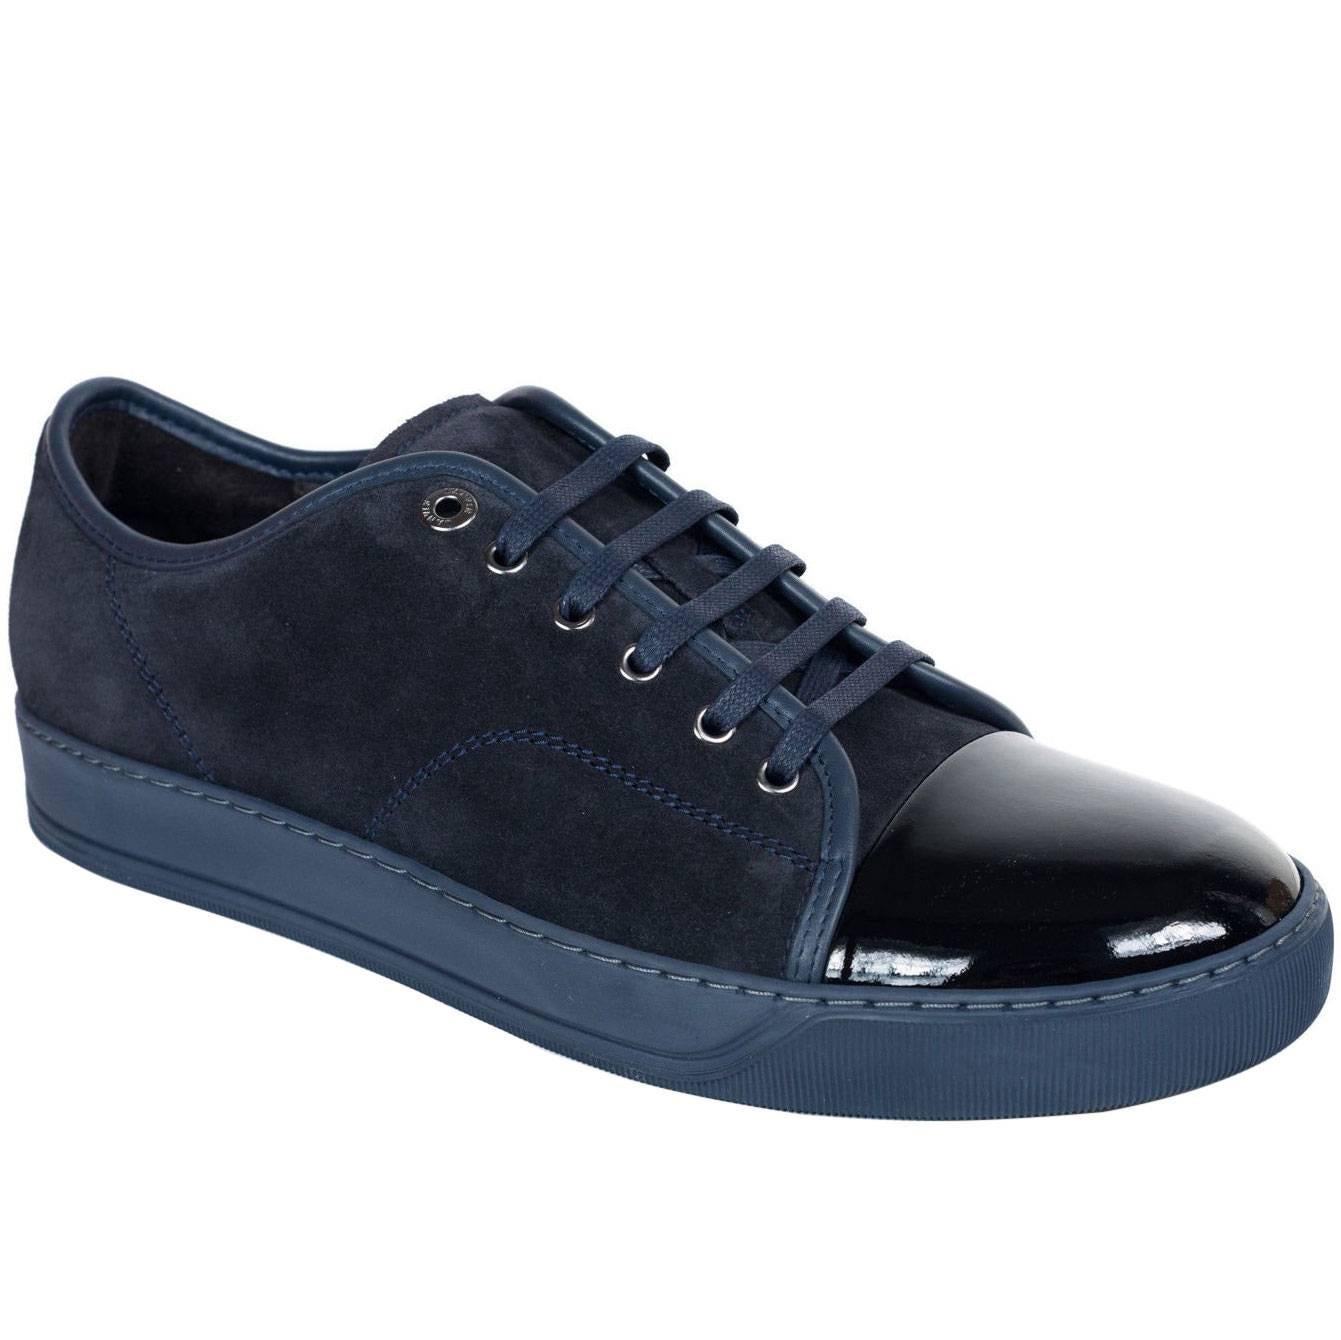 Lanvin Dark Blue Suede Patent Cap Lace Up DDB1 Sneakers For Sale